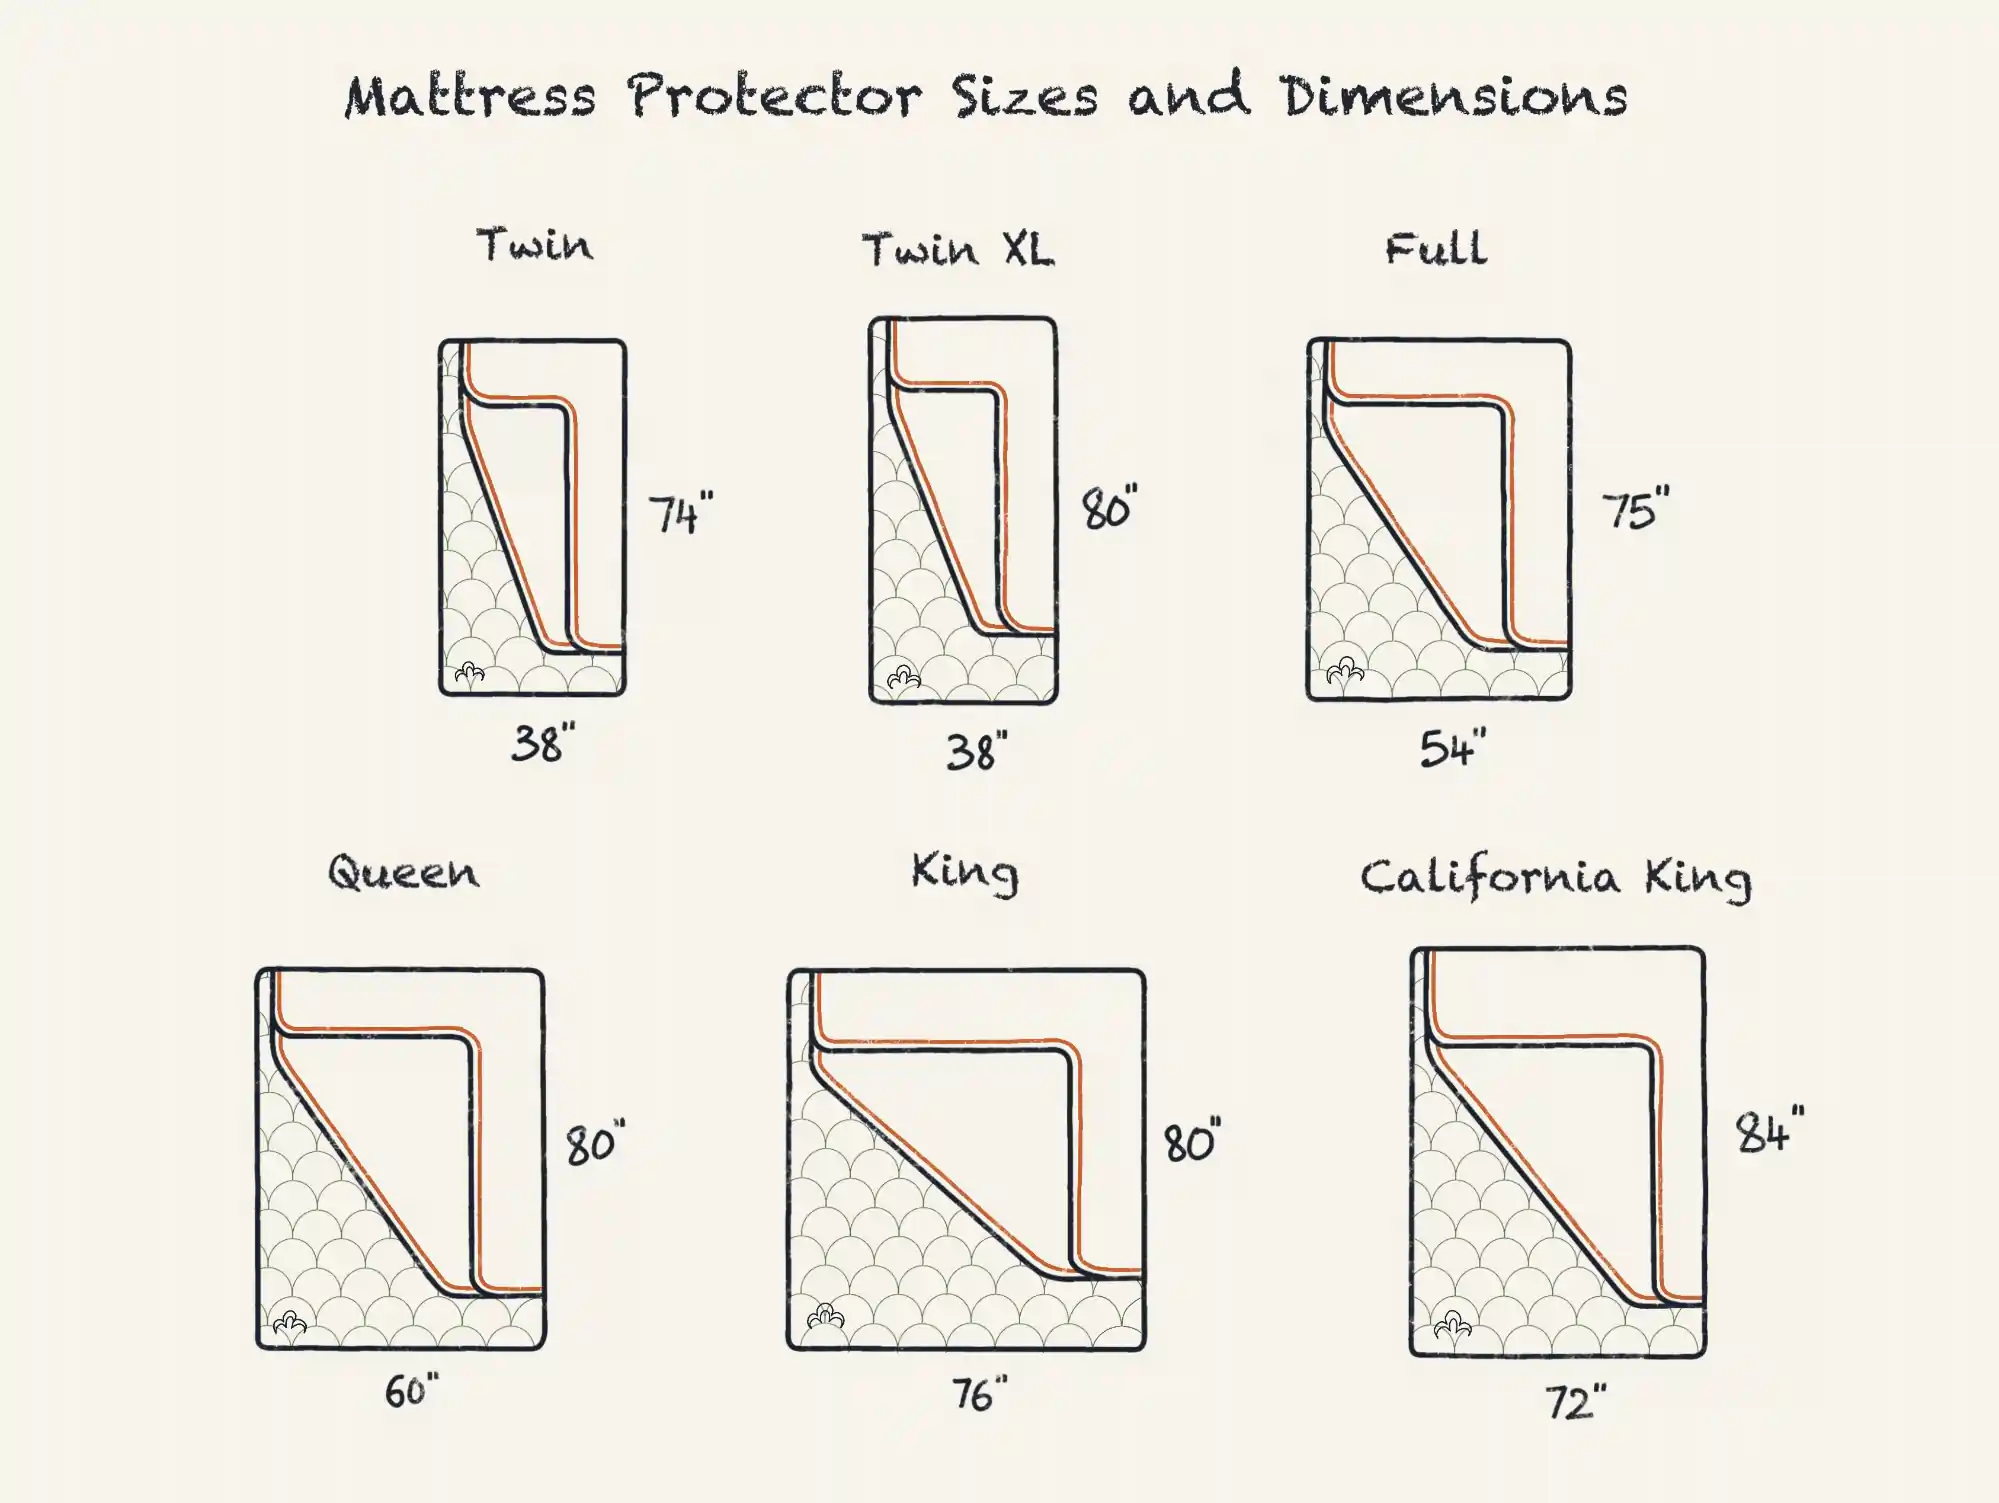 Illustration of Mattress Protector Sizes and Dimensions Chart